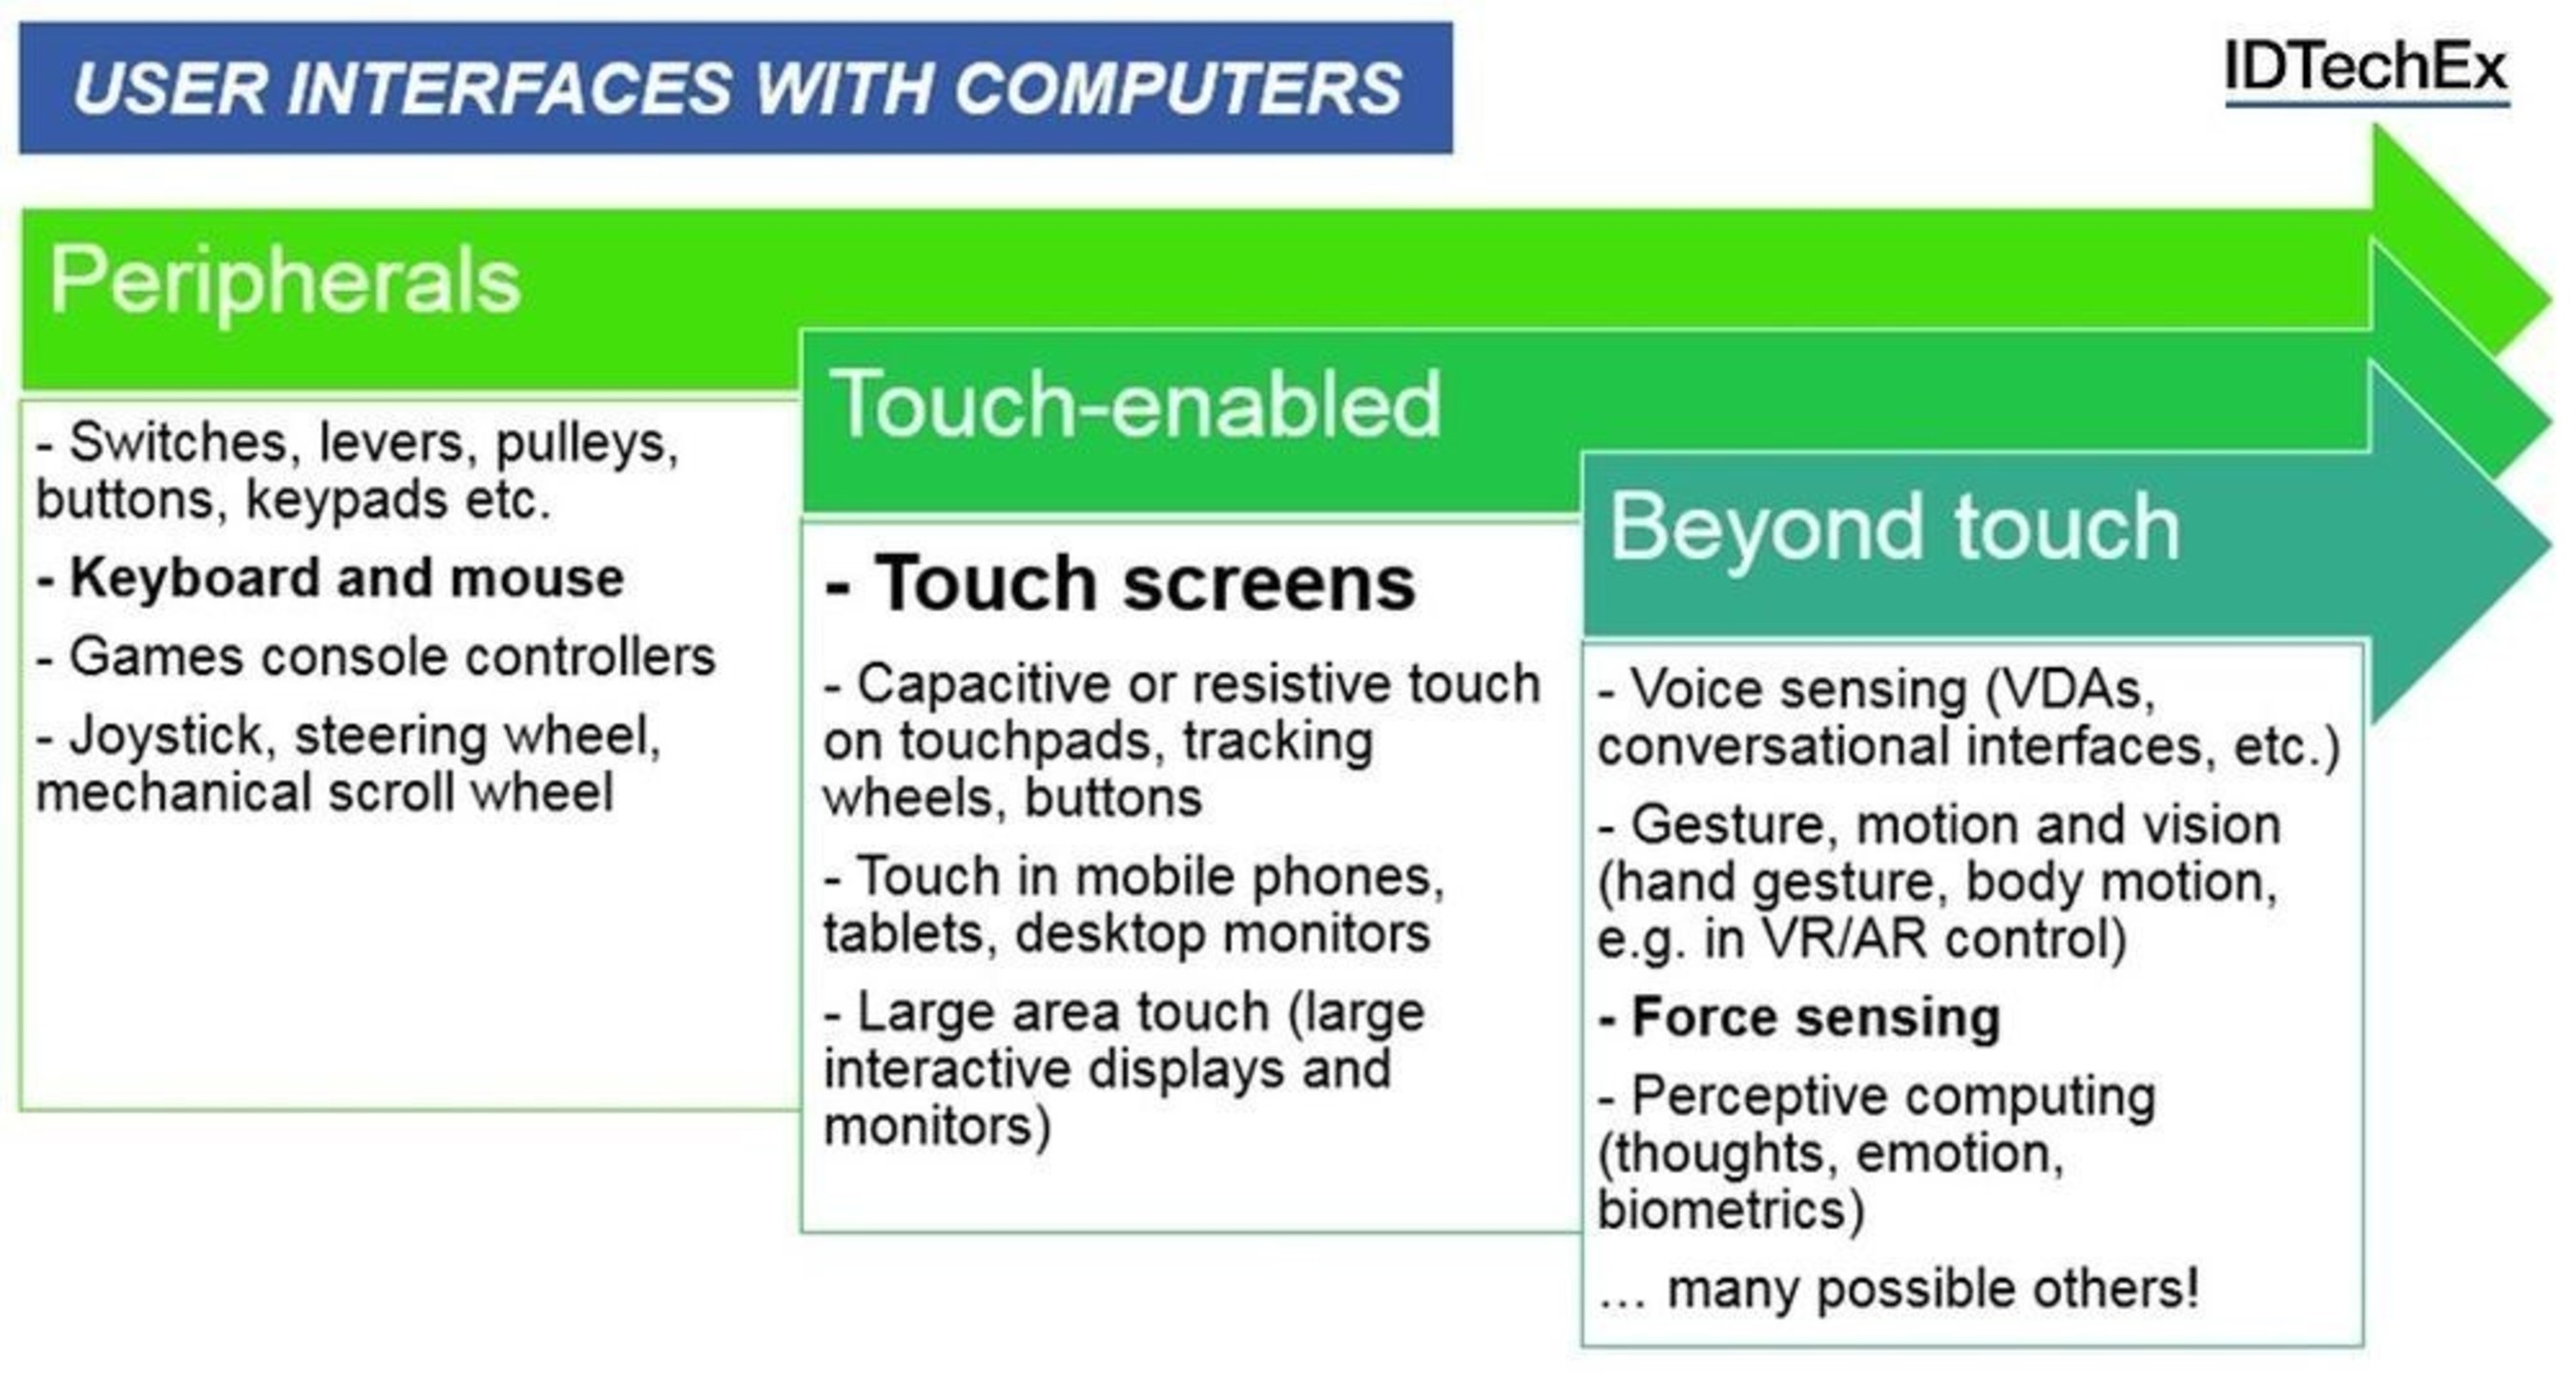 The evolution of user interfaces with computers. Source: IDTechEx Research report Force Sensors in User Interfaces 2017-2027 (www.IDTechEx.com/force). (PRNewsFoto/IDTechEx)